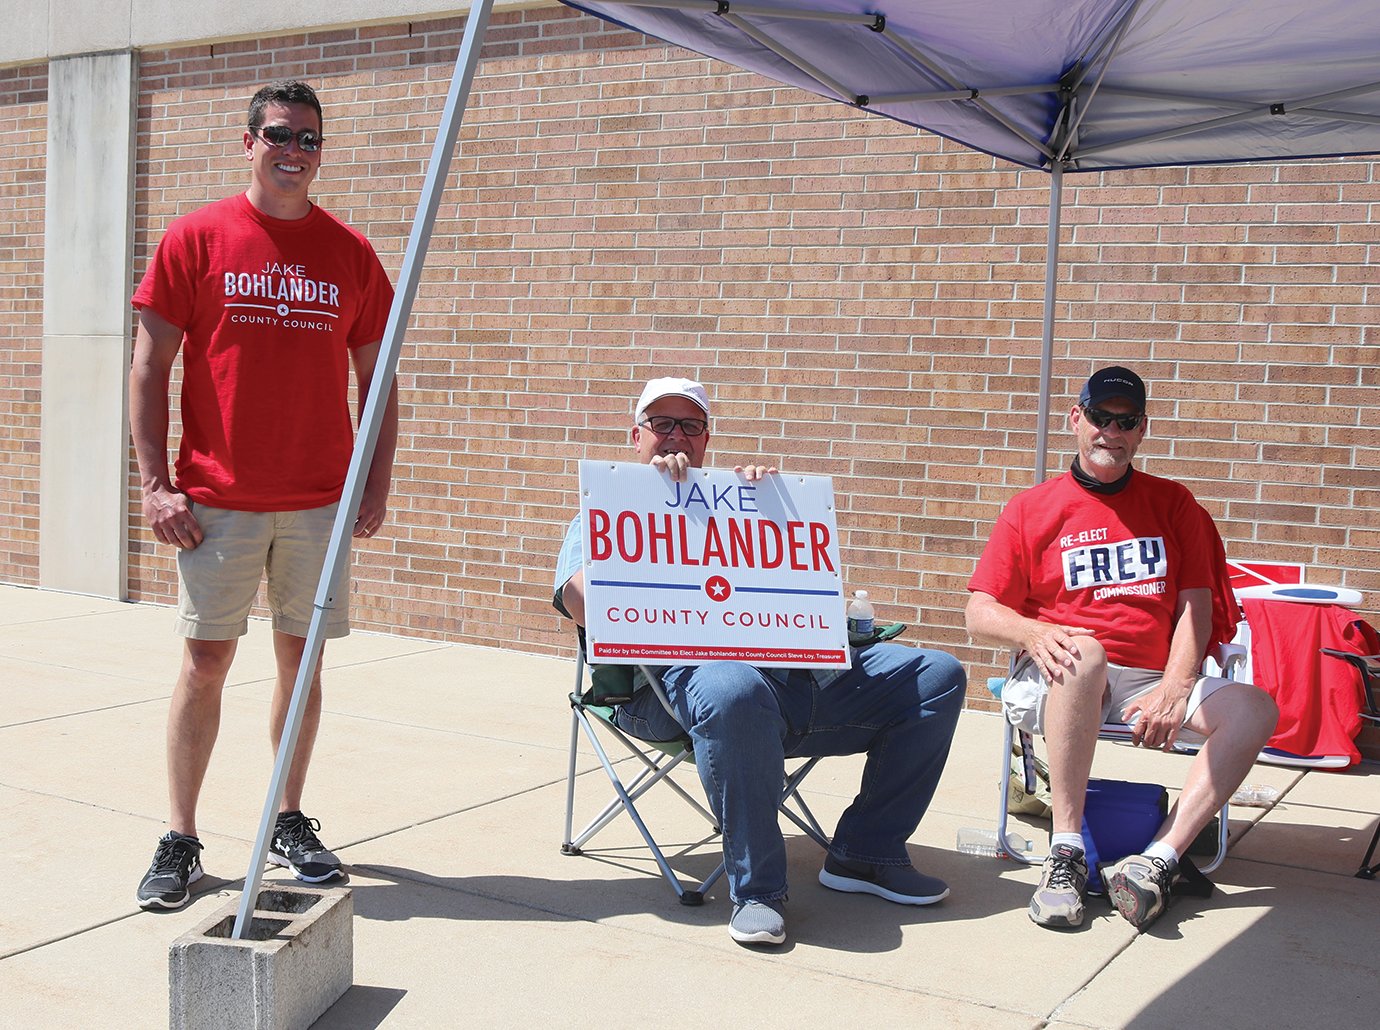 County council candidate Jake Bohlander, from left, completes his 2020 campaign by greeting voters at the polling center at Southmont High School on Tuesday alongside supportes Bob Cox and Ron Dickerson.